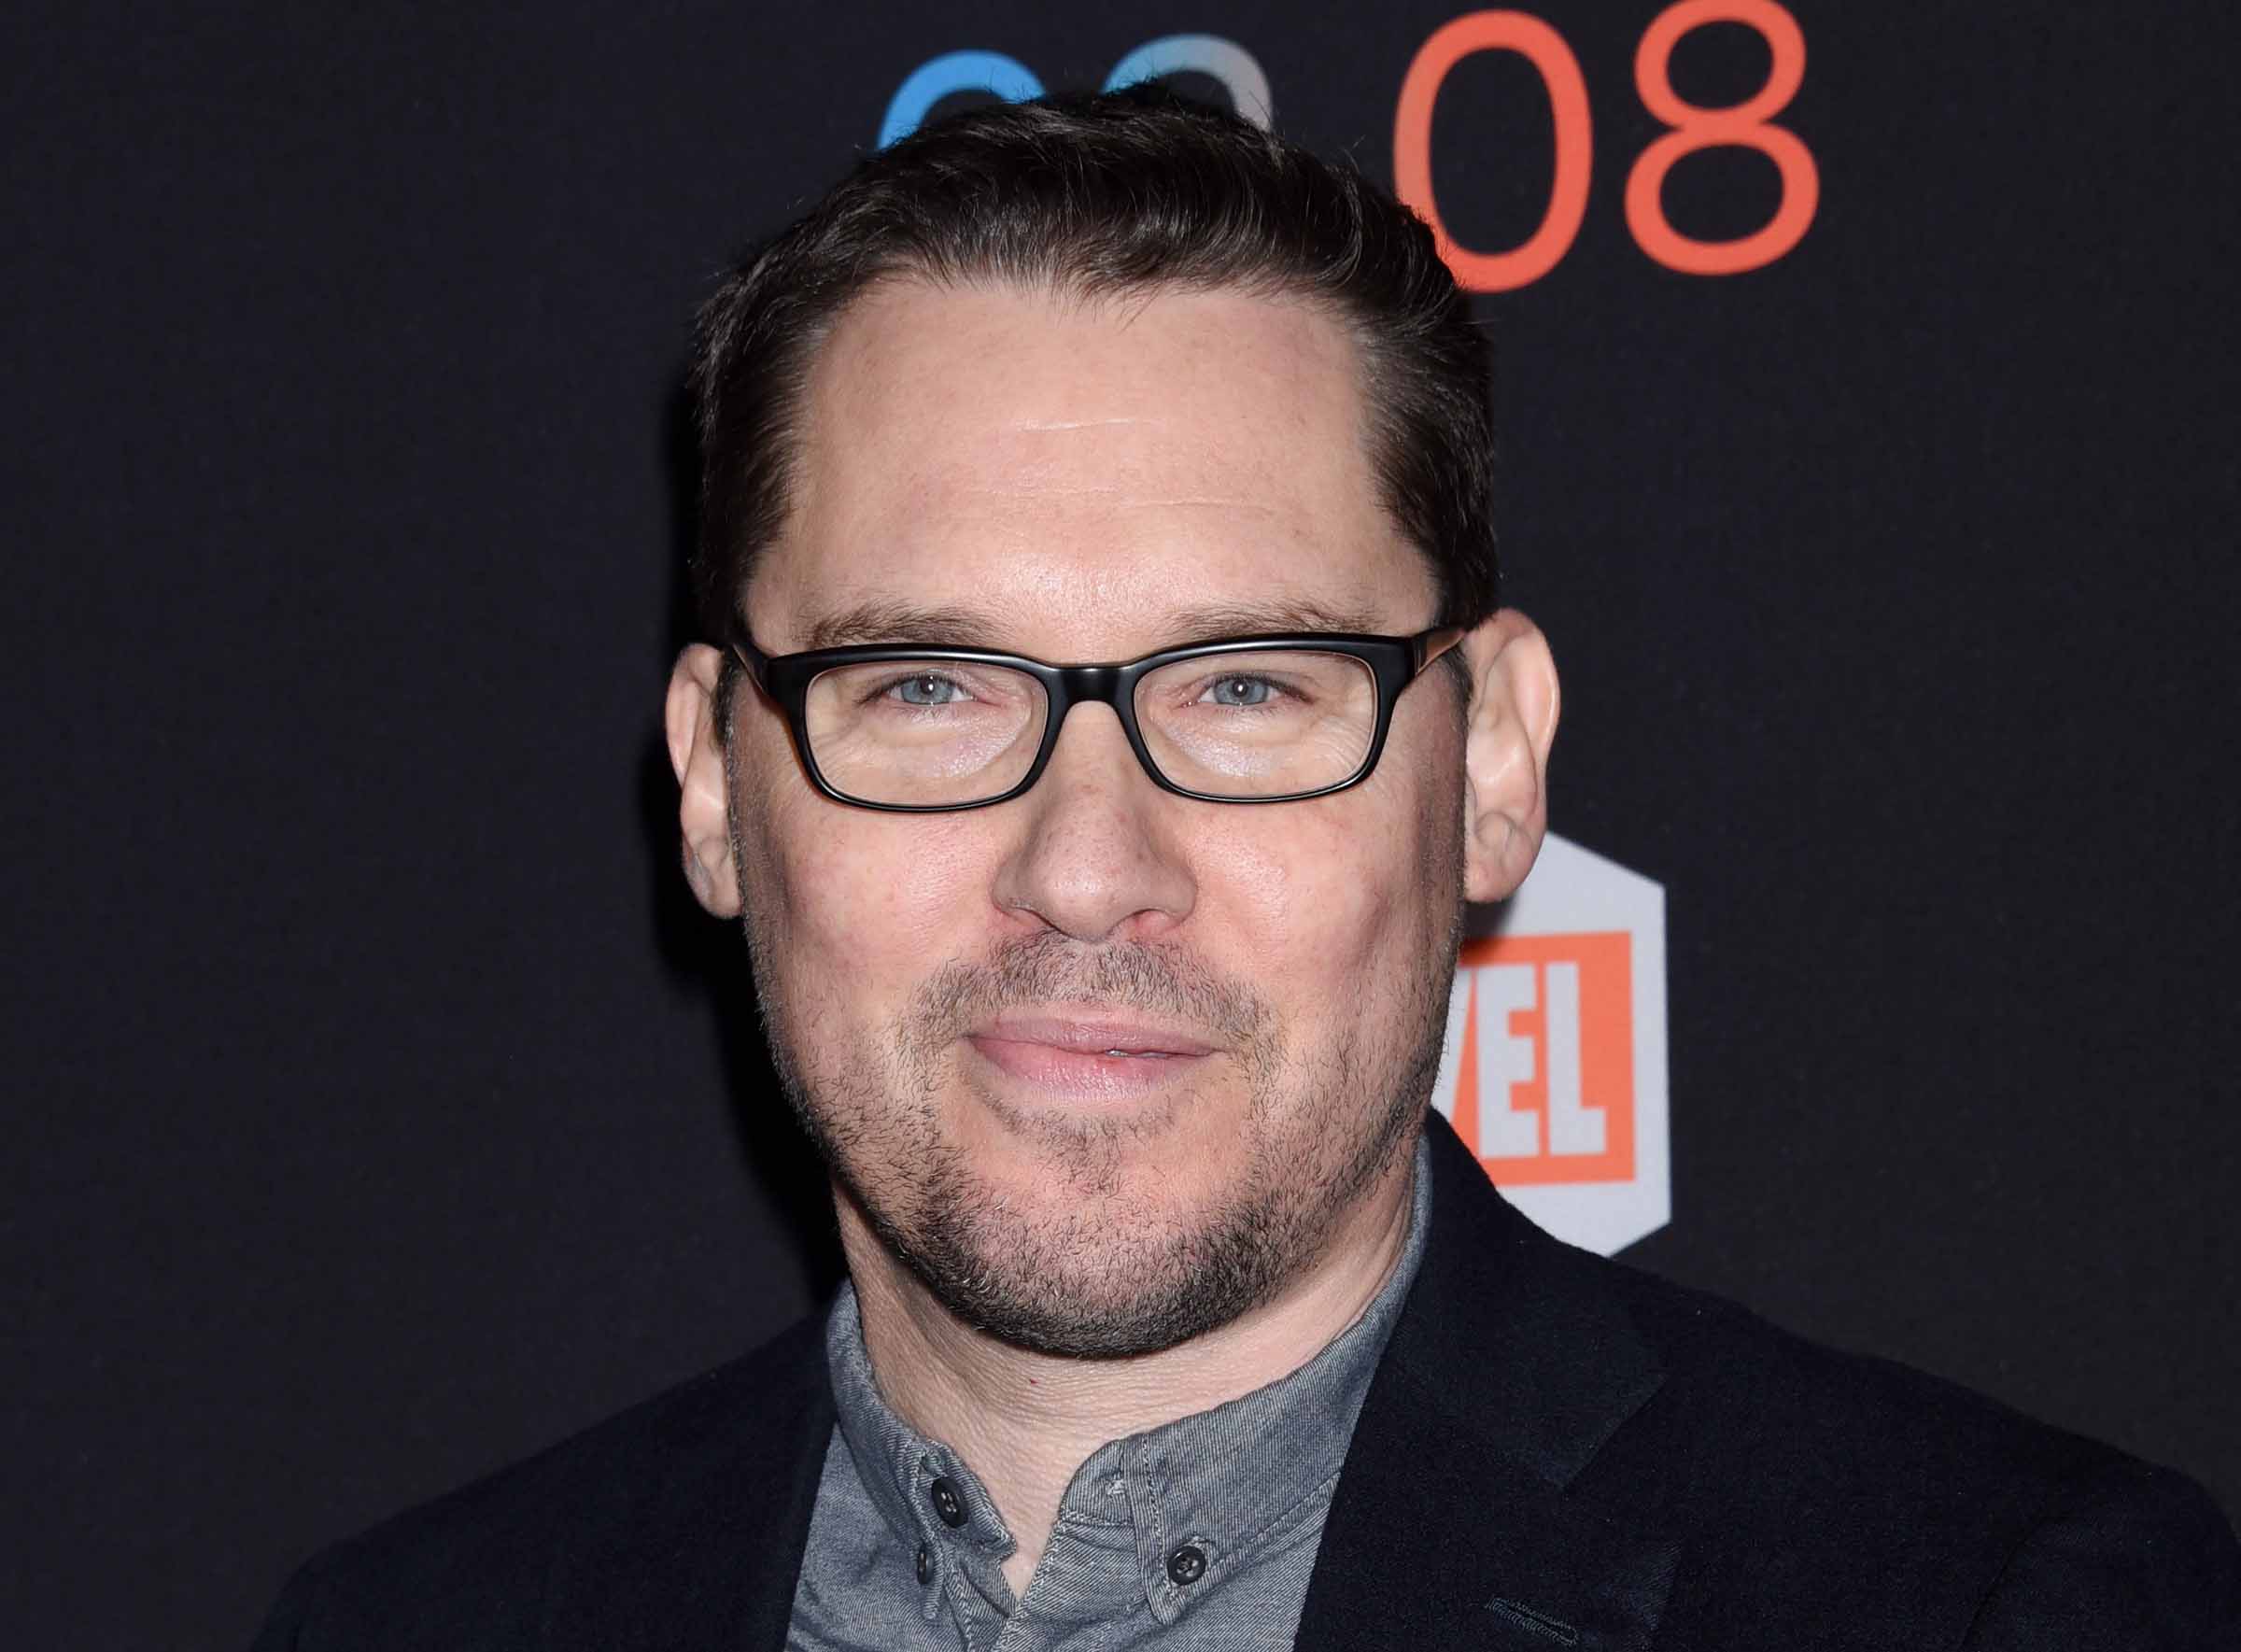 A history of abuse The terrible past of Bryan Singer allegations